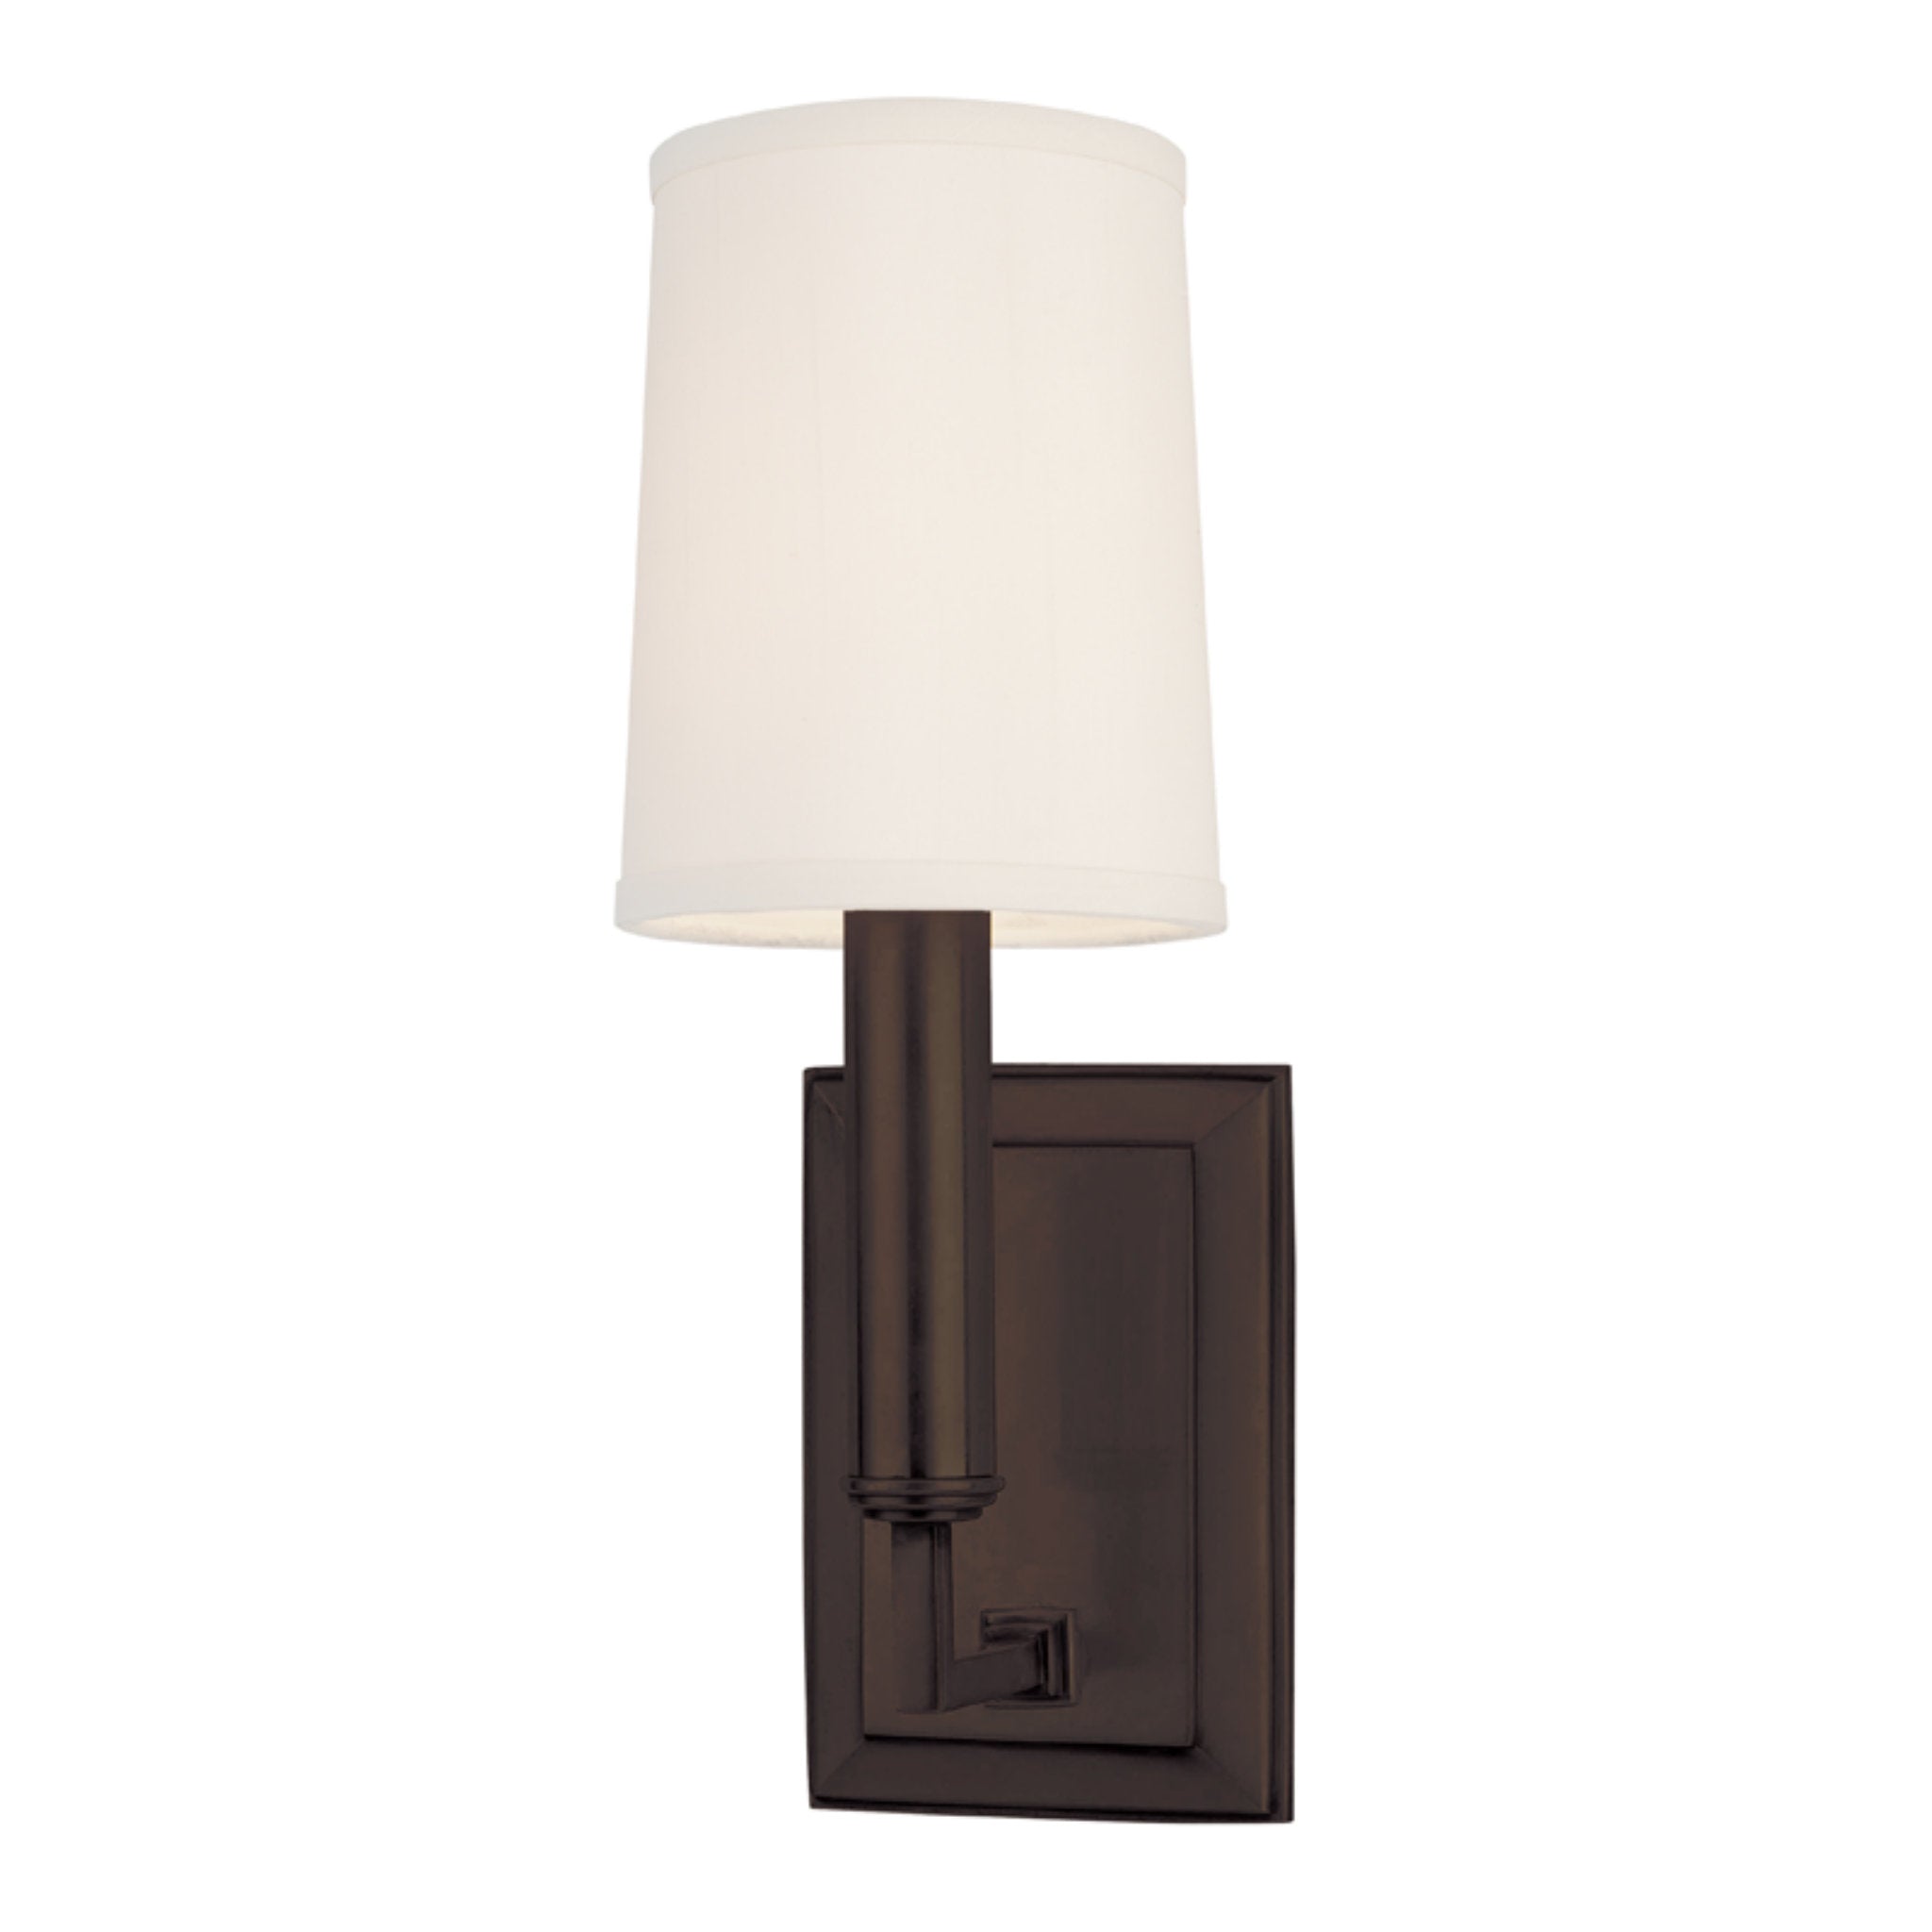 Clinton 1 Light Wall Sconce in Old Bronze